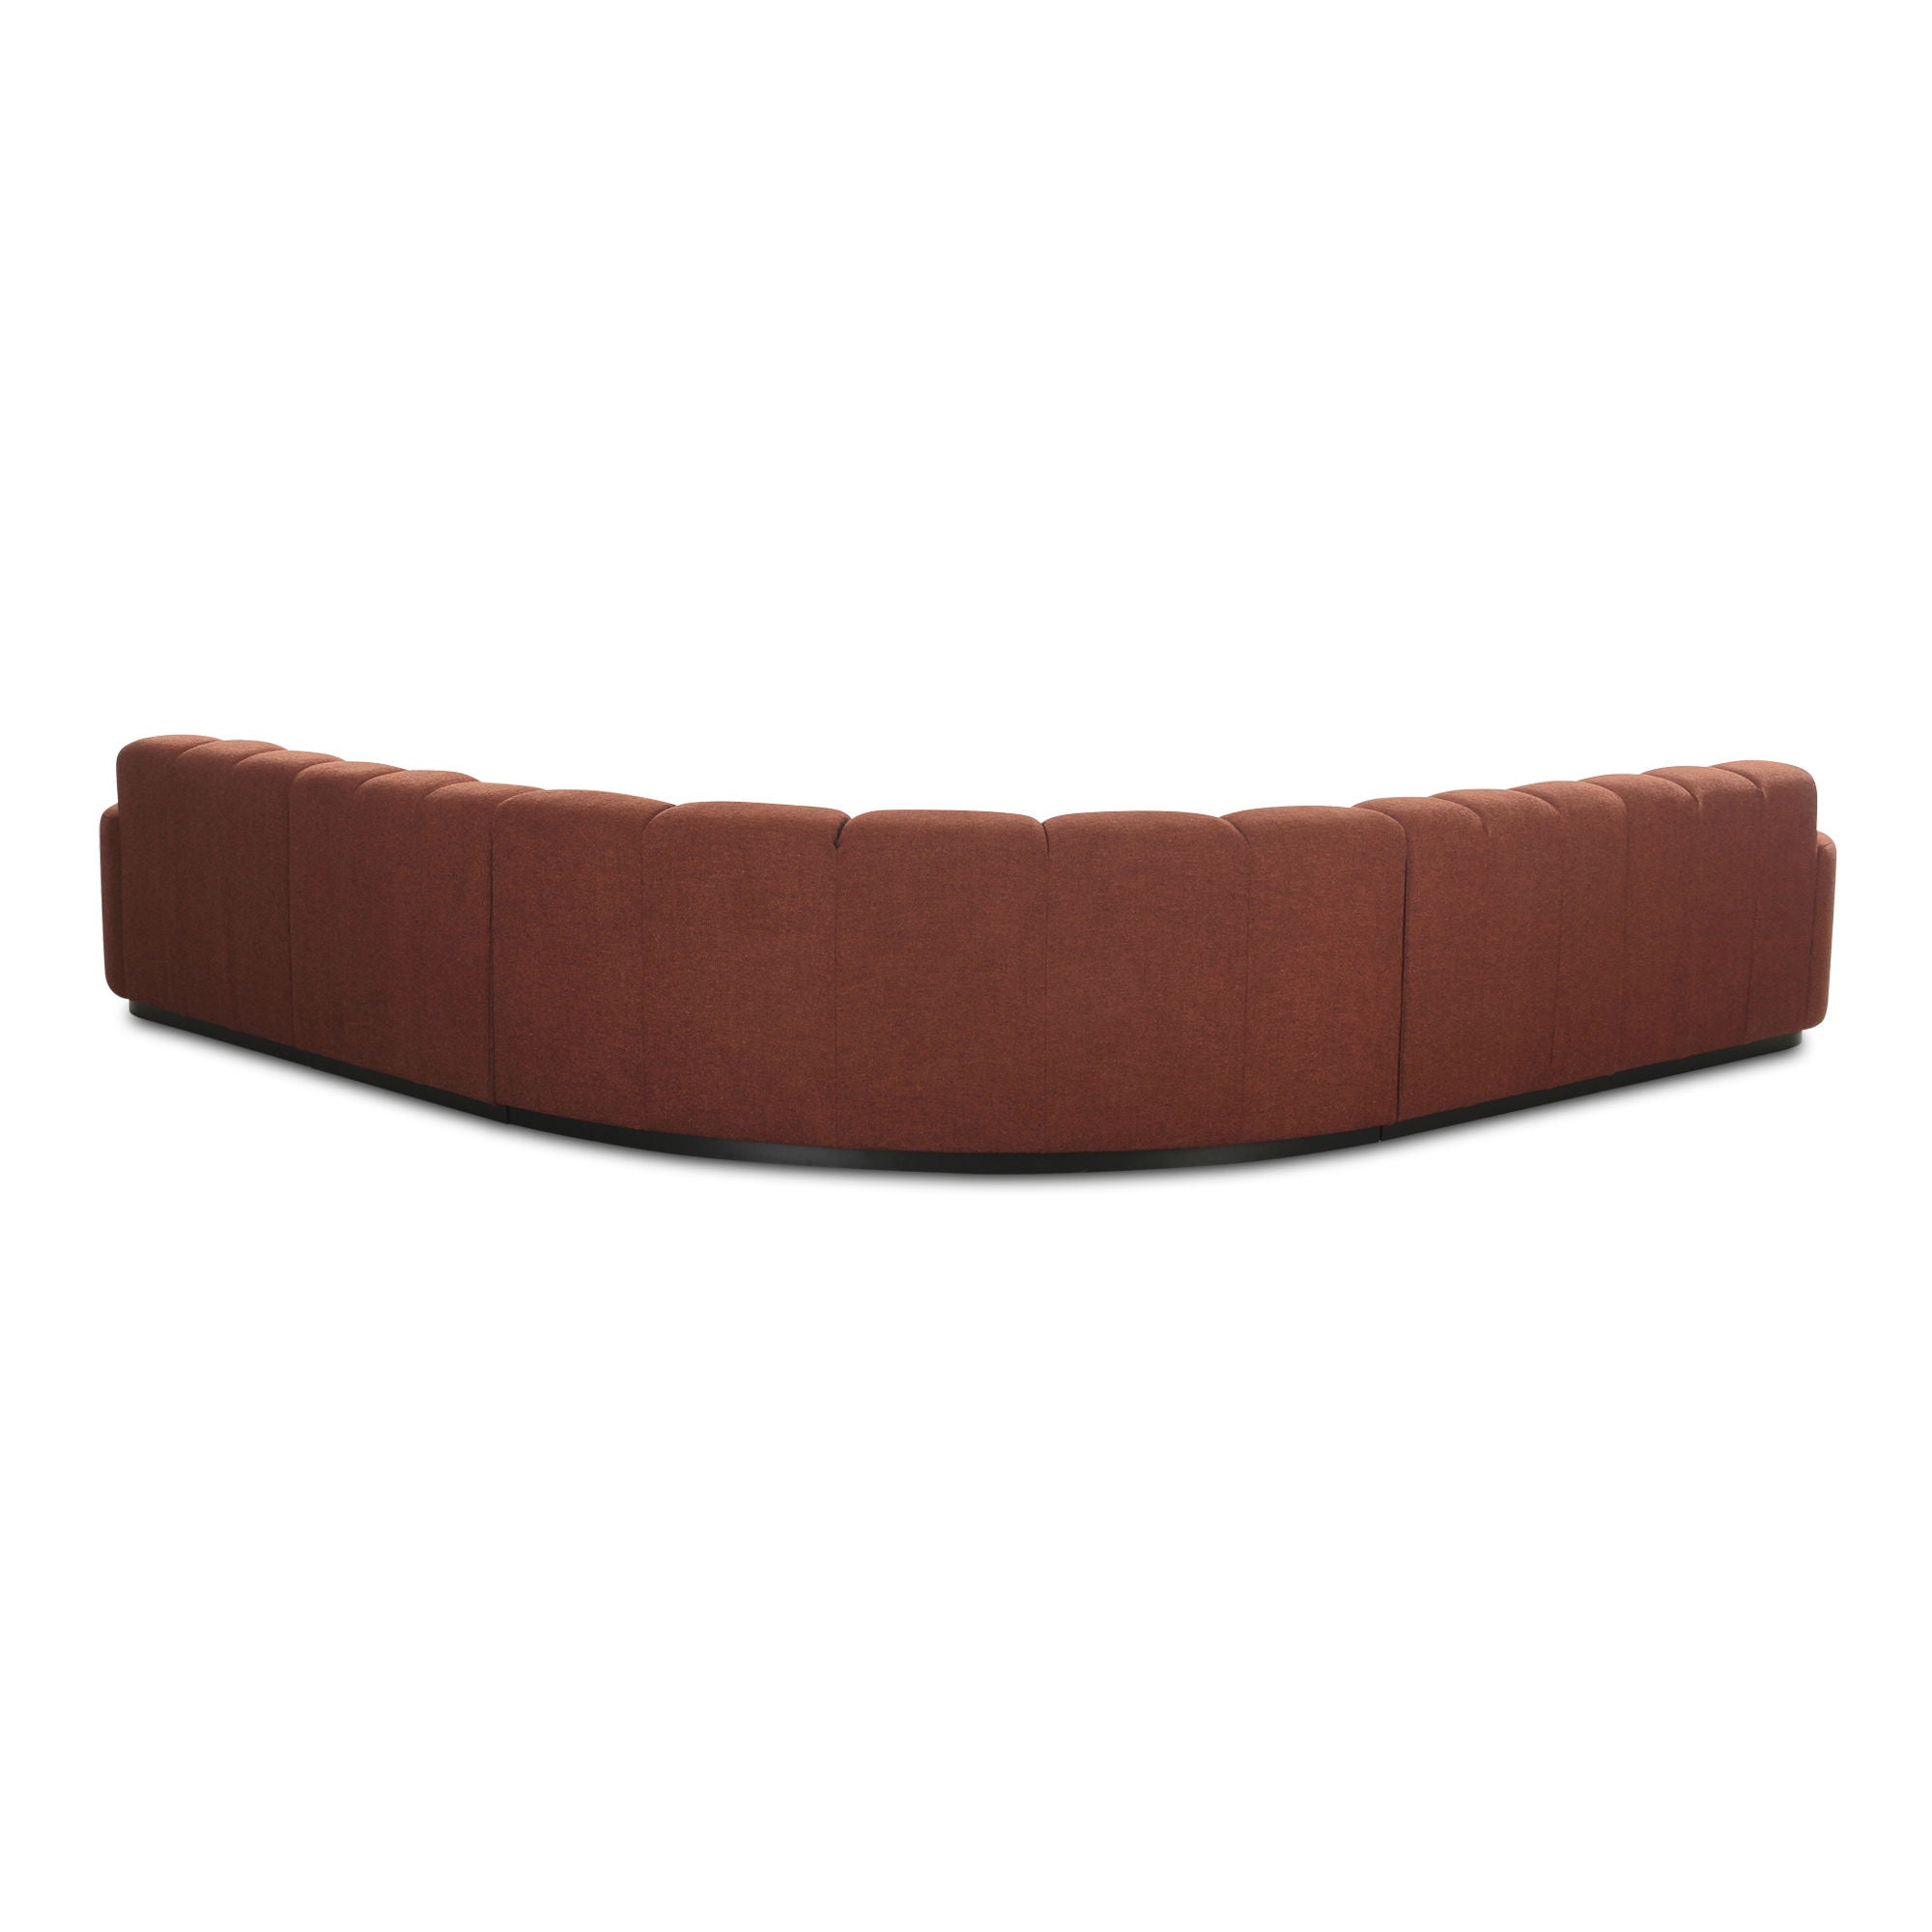 Roman - L-Shaped Sectional - Red